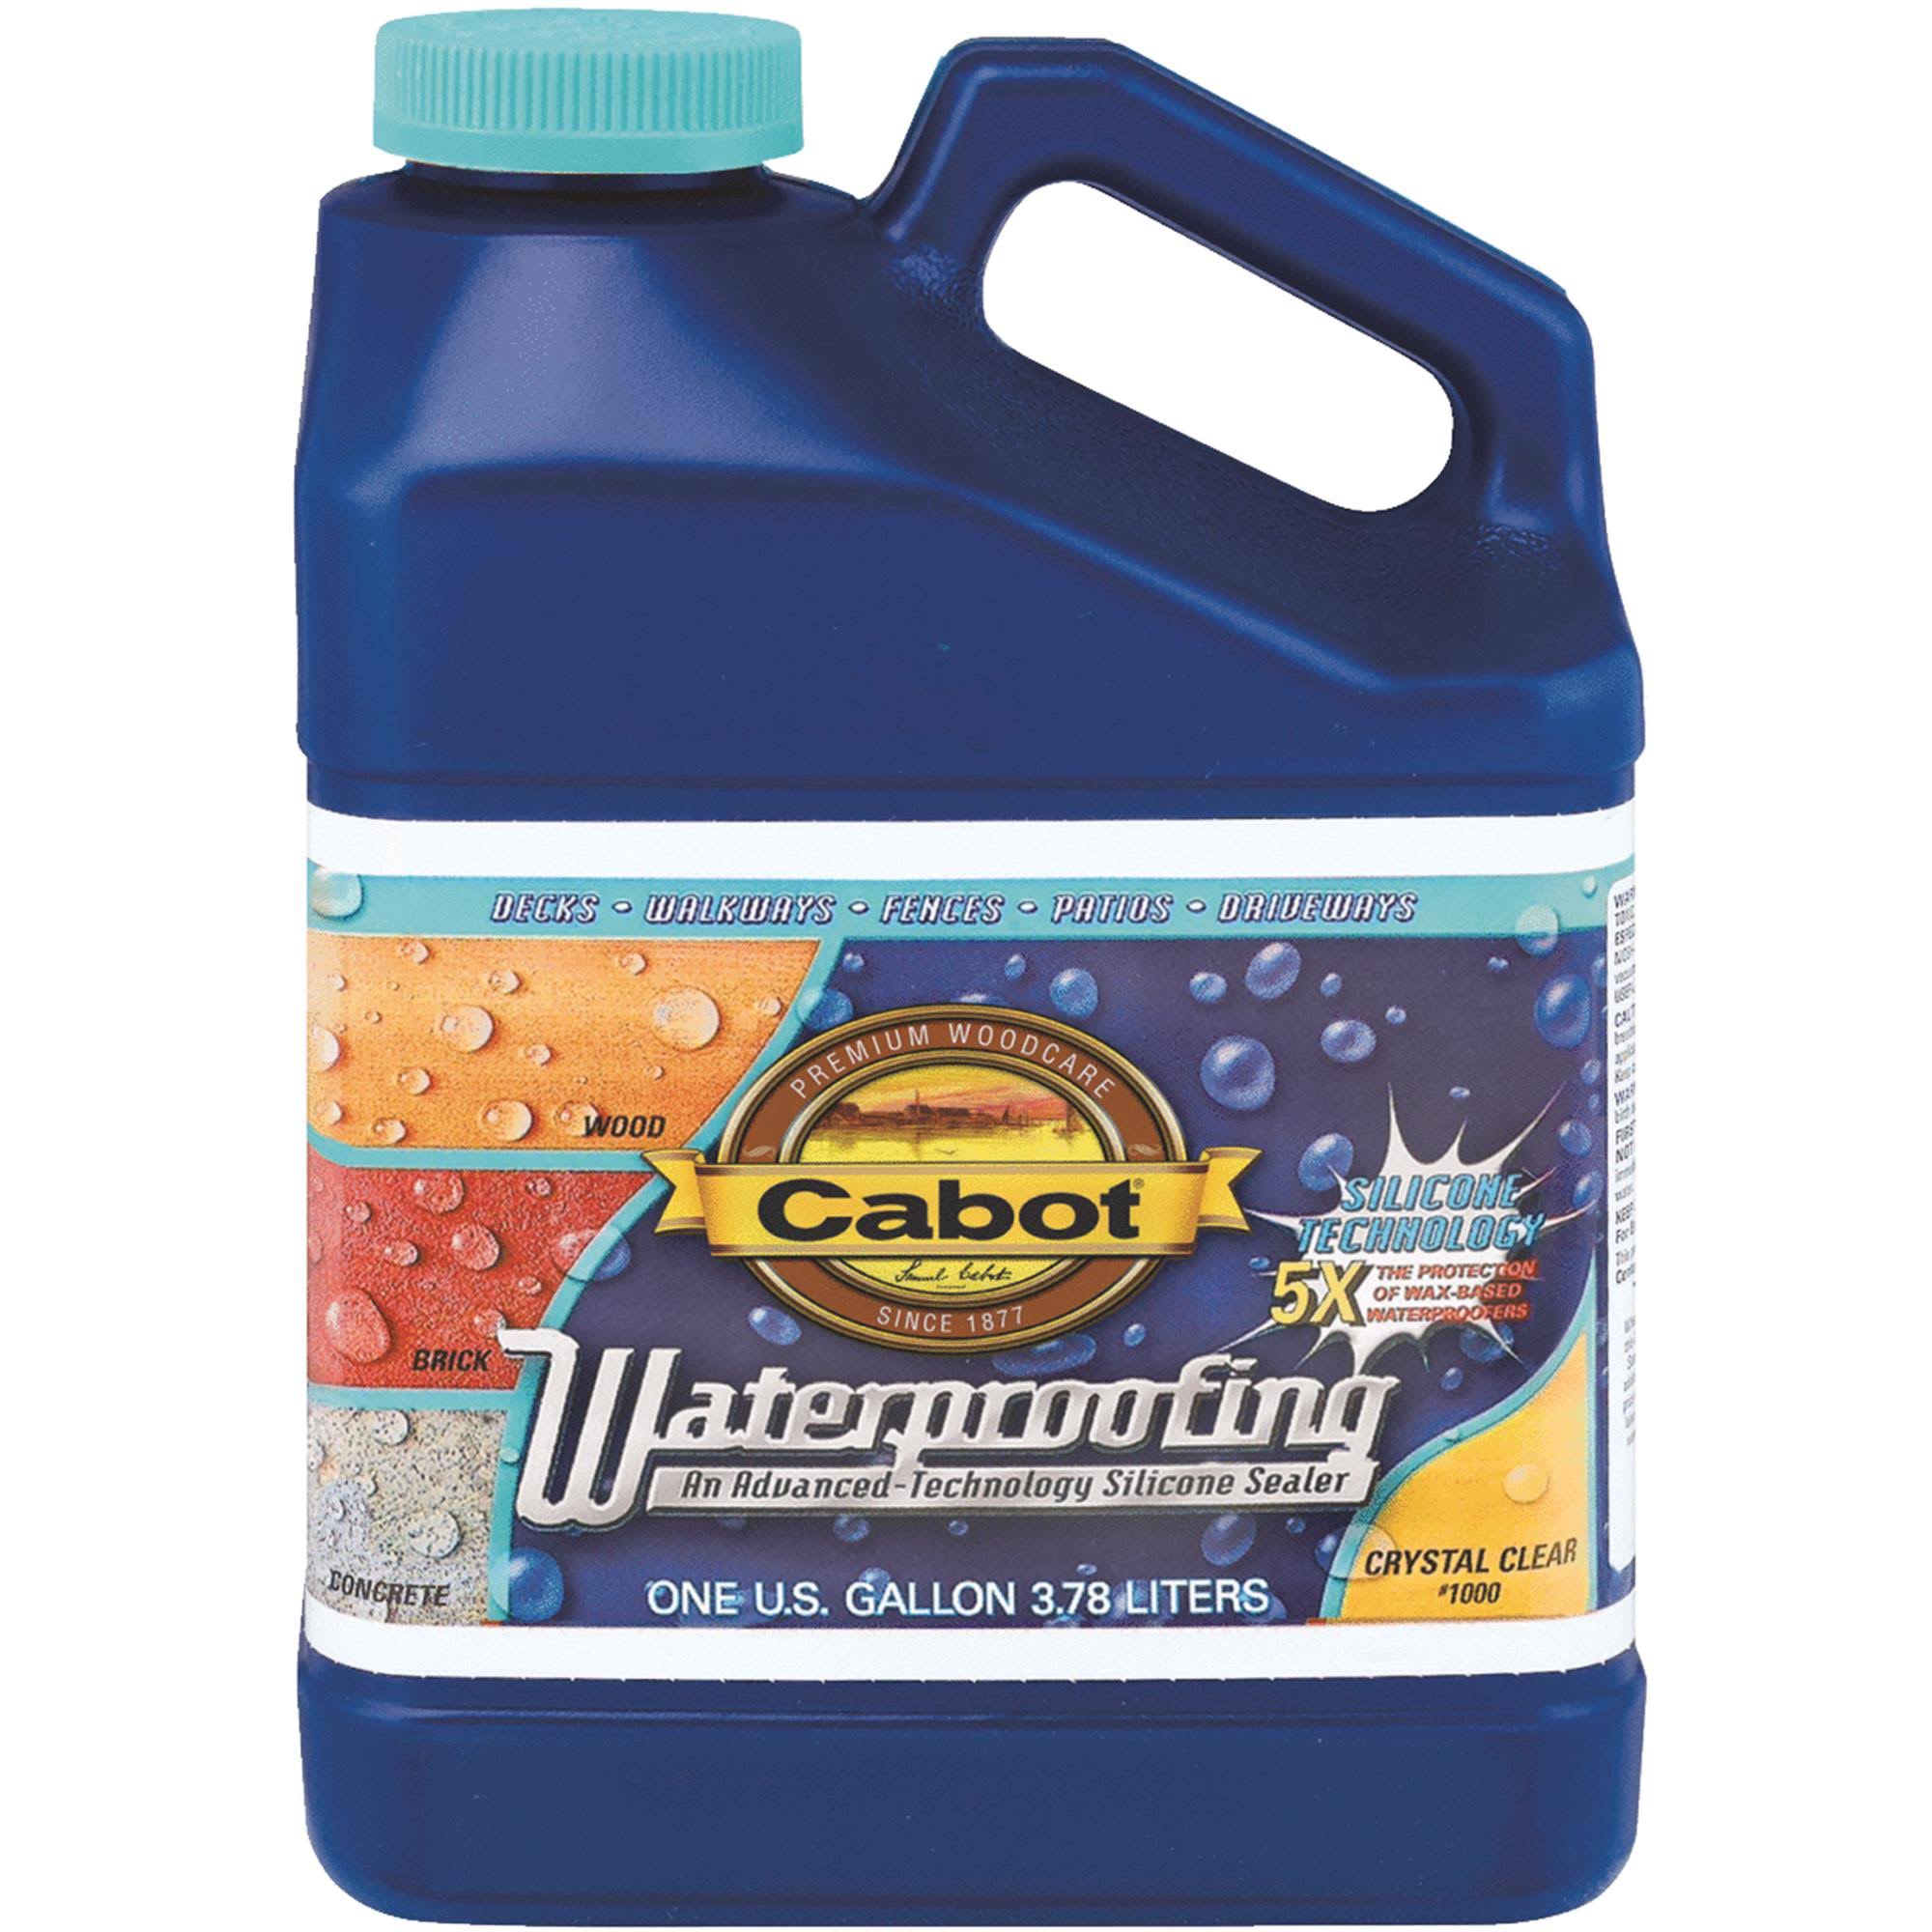 Cabot Waterproofing Silicone Sealer - Crystal Clear, 1 gallon